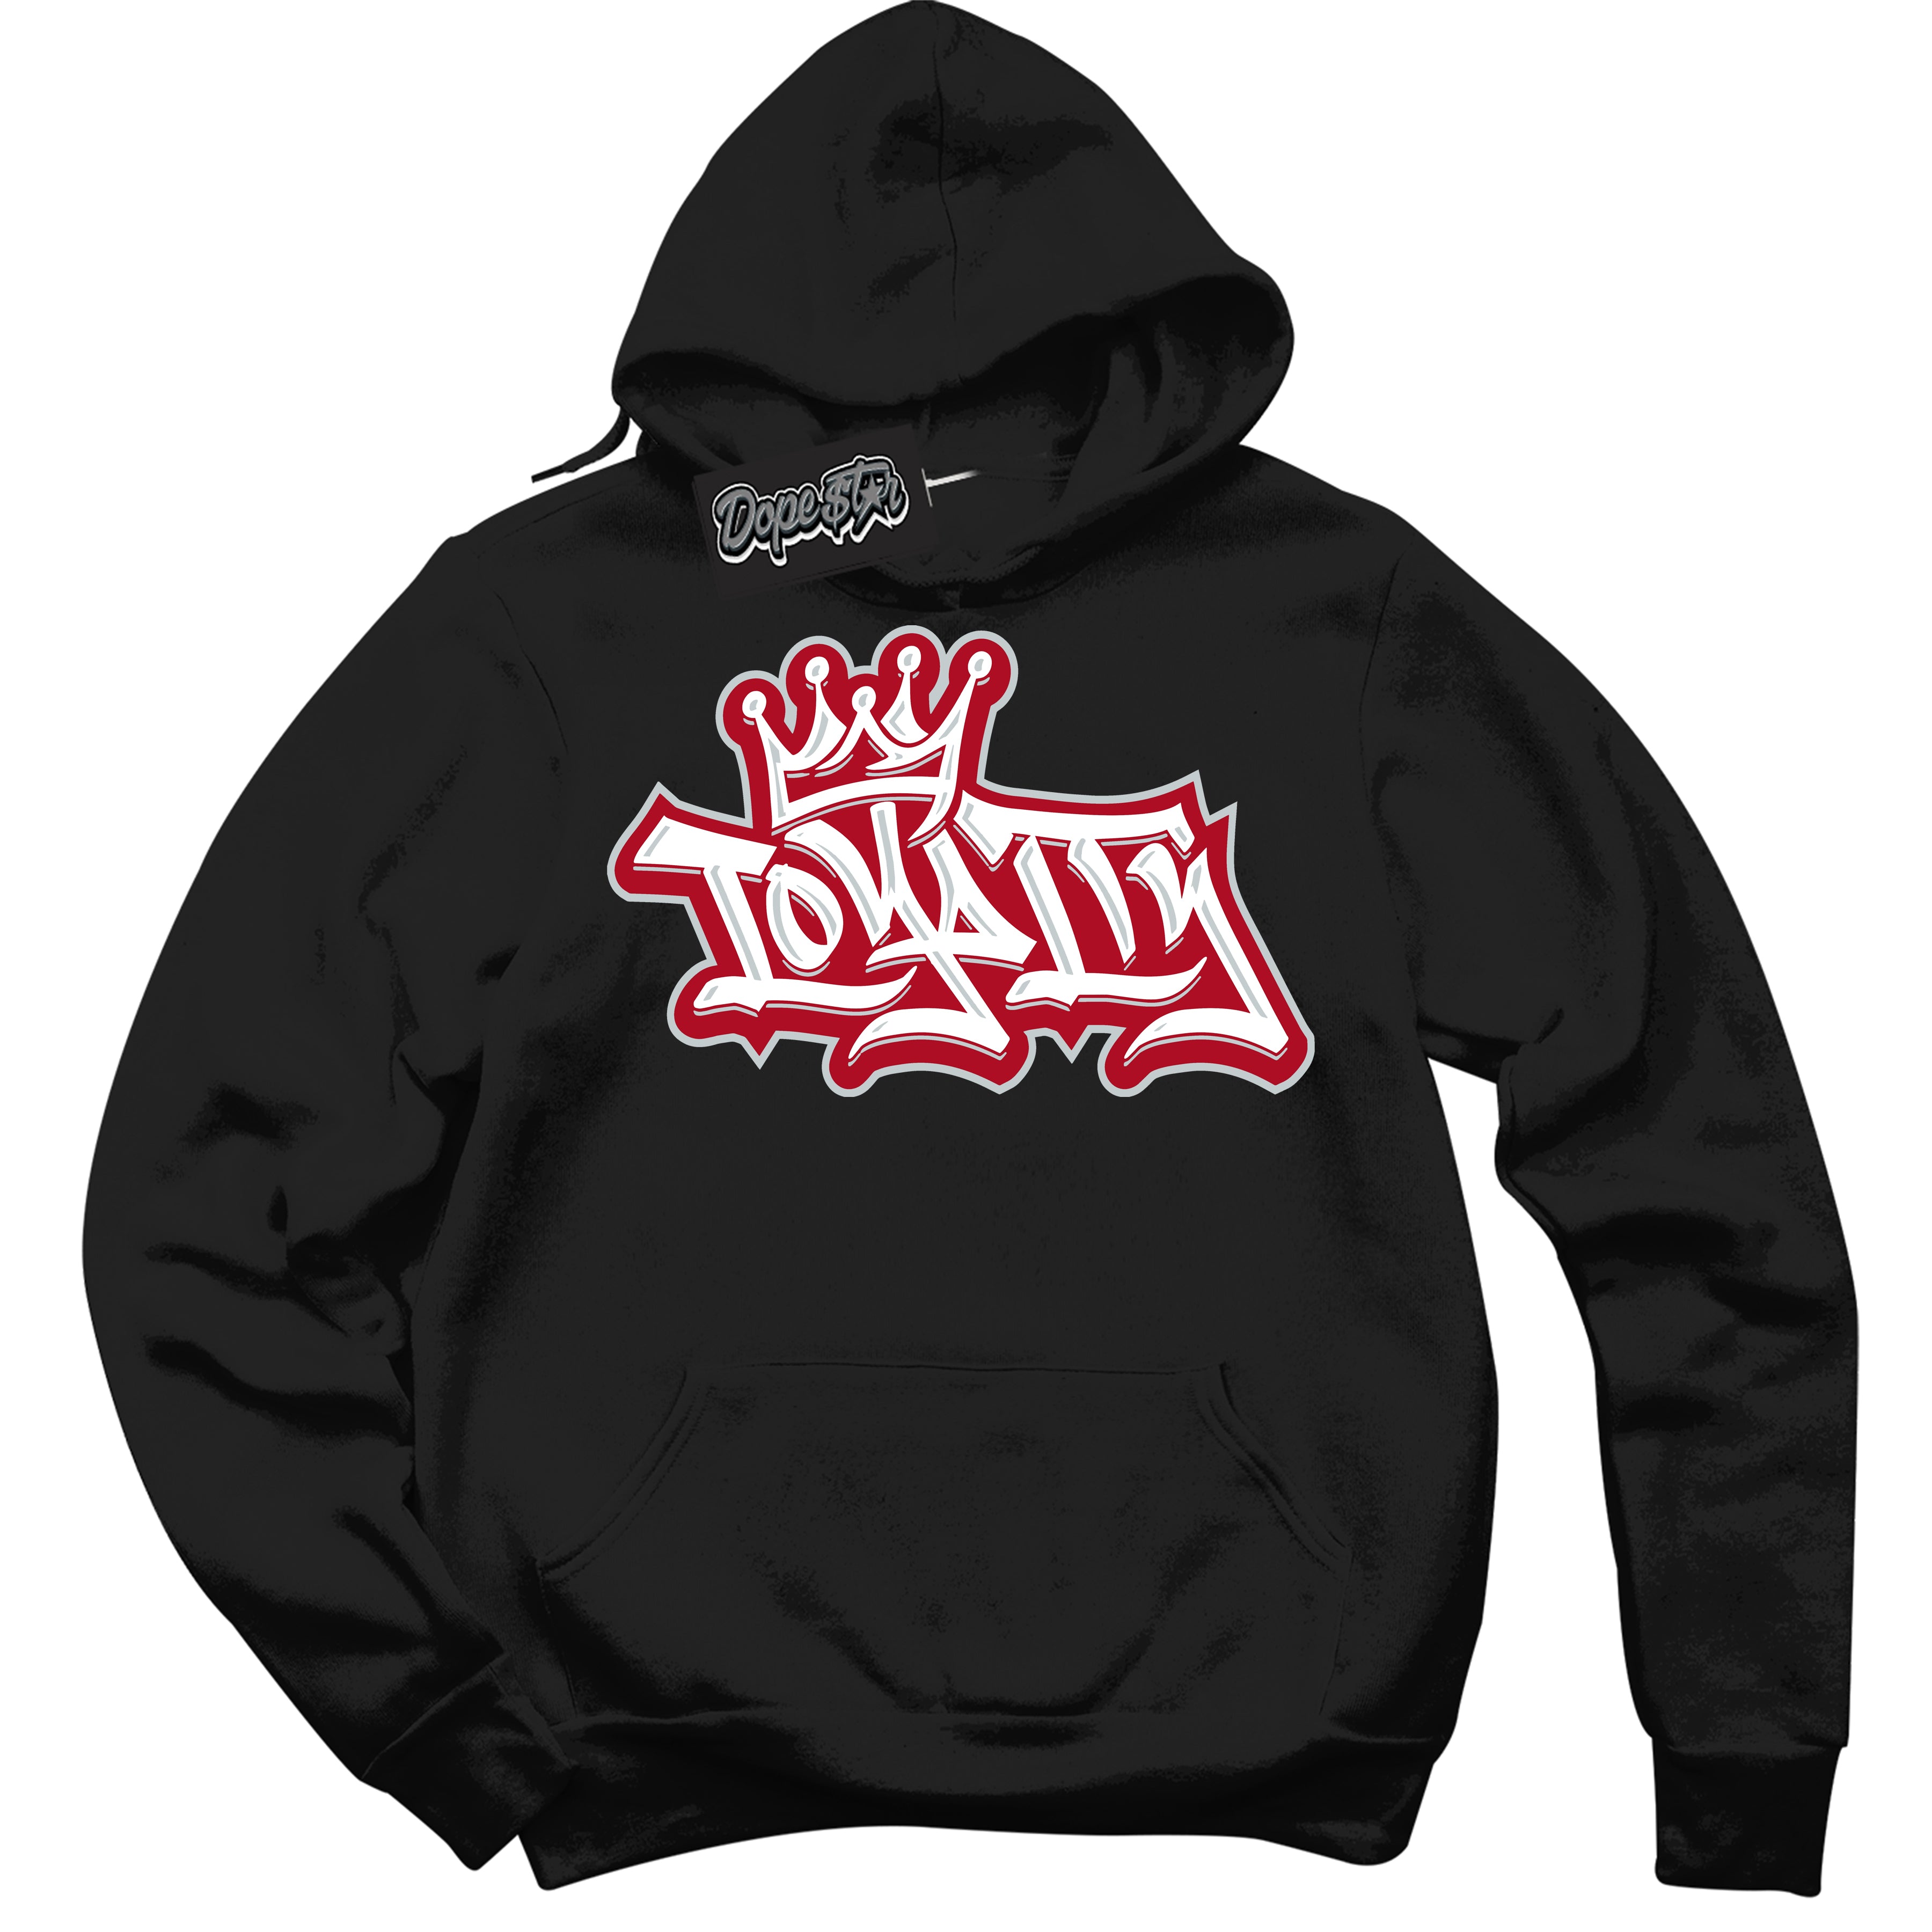 Cool Black Hoodie with “ Loyalty Crown ”  design that Perfectly Matches  Reverse Ultraman Sneakers.